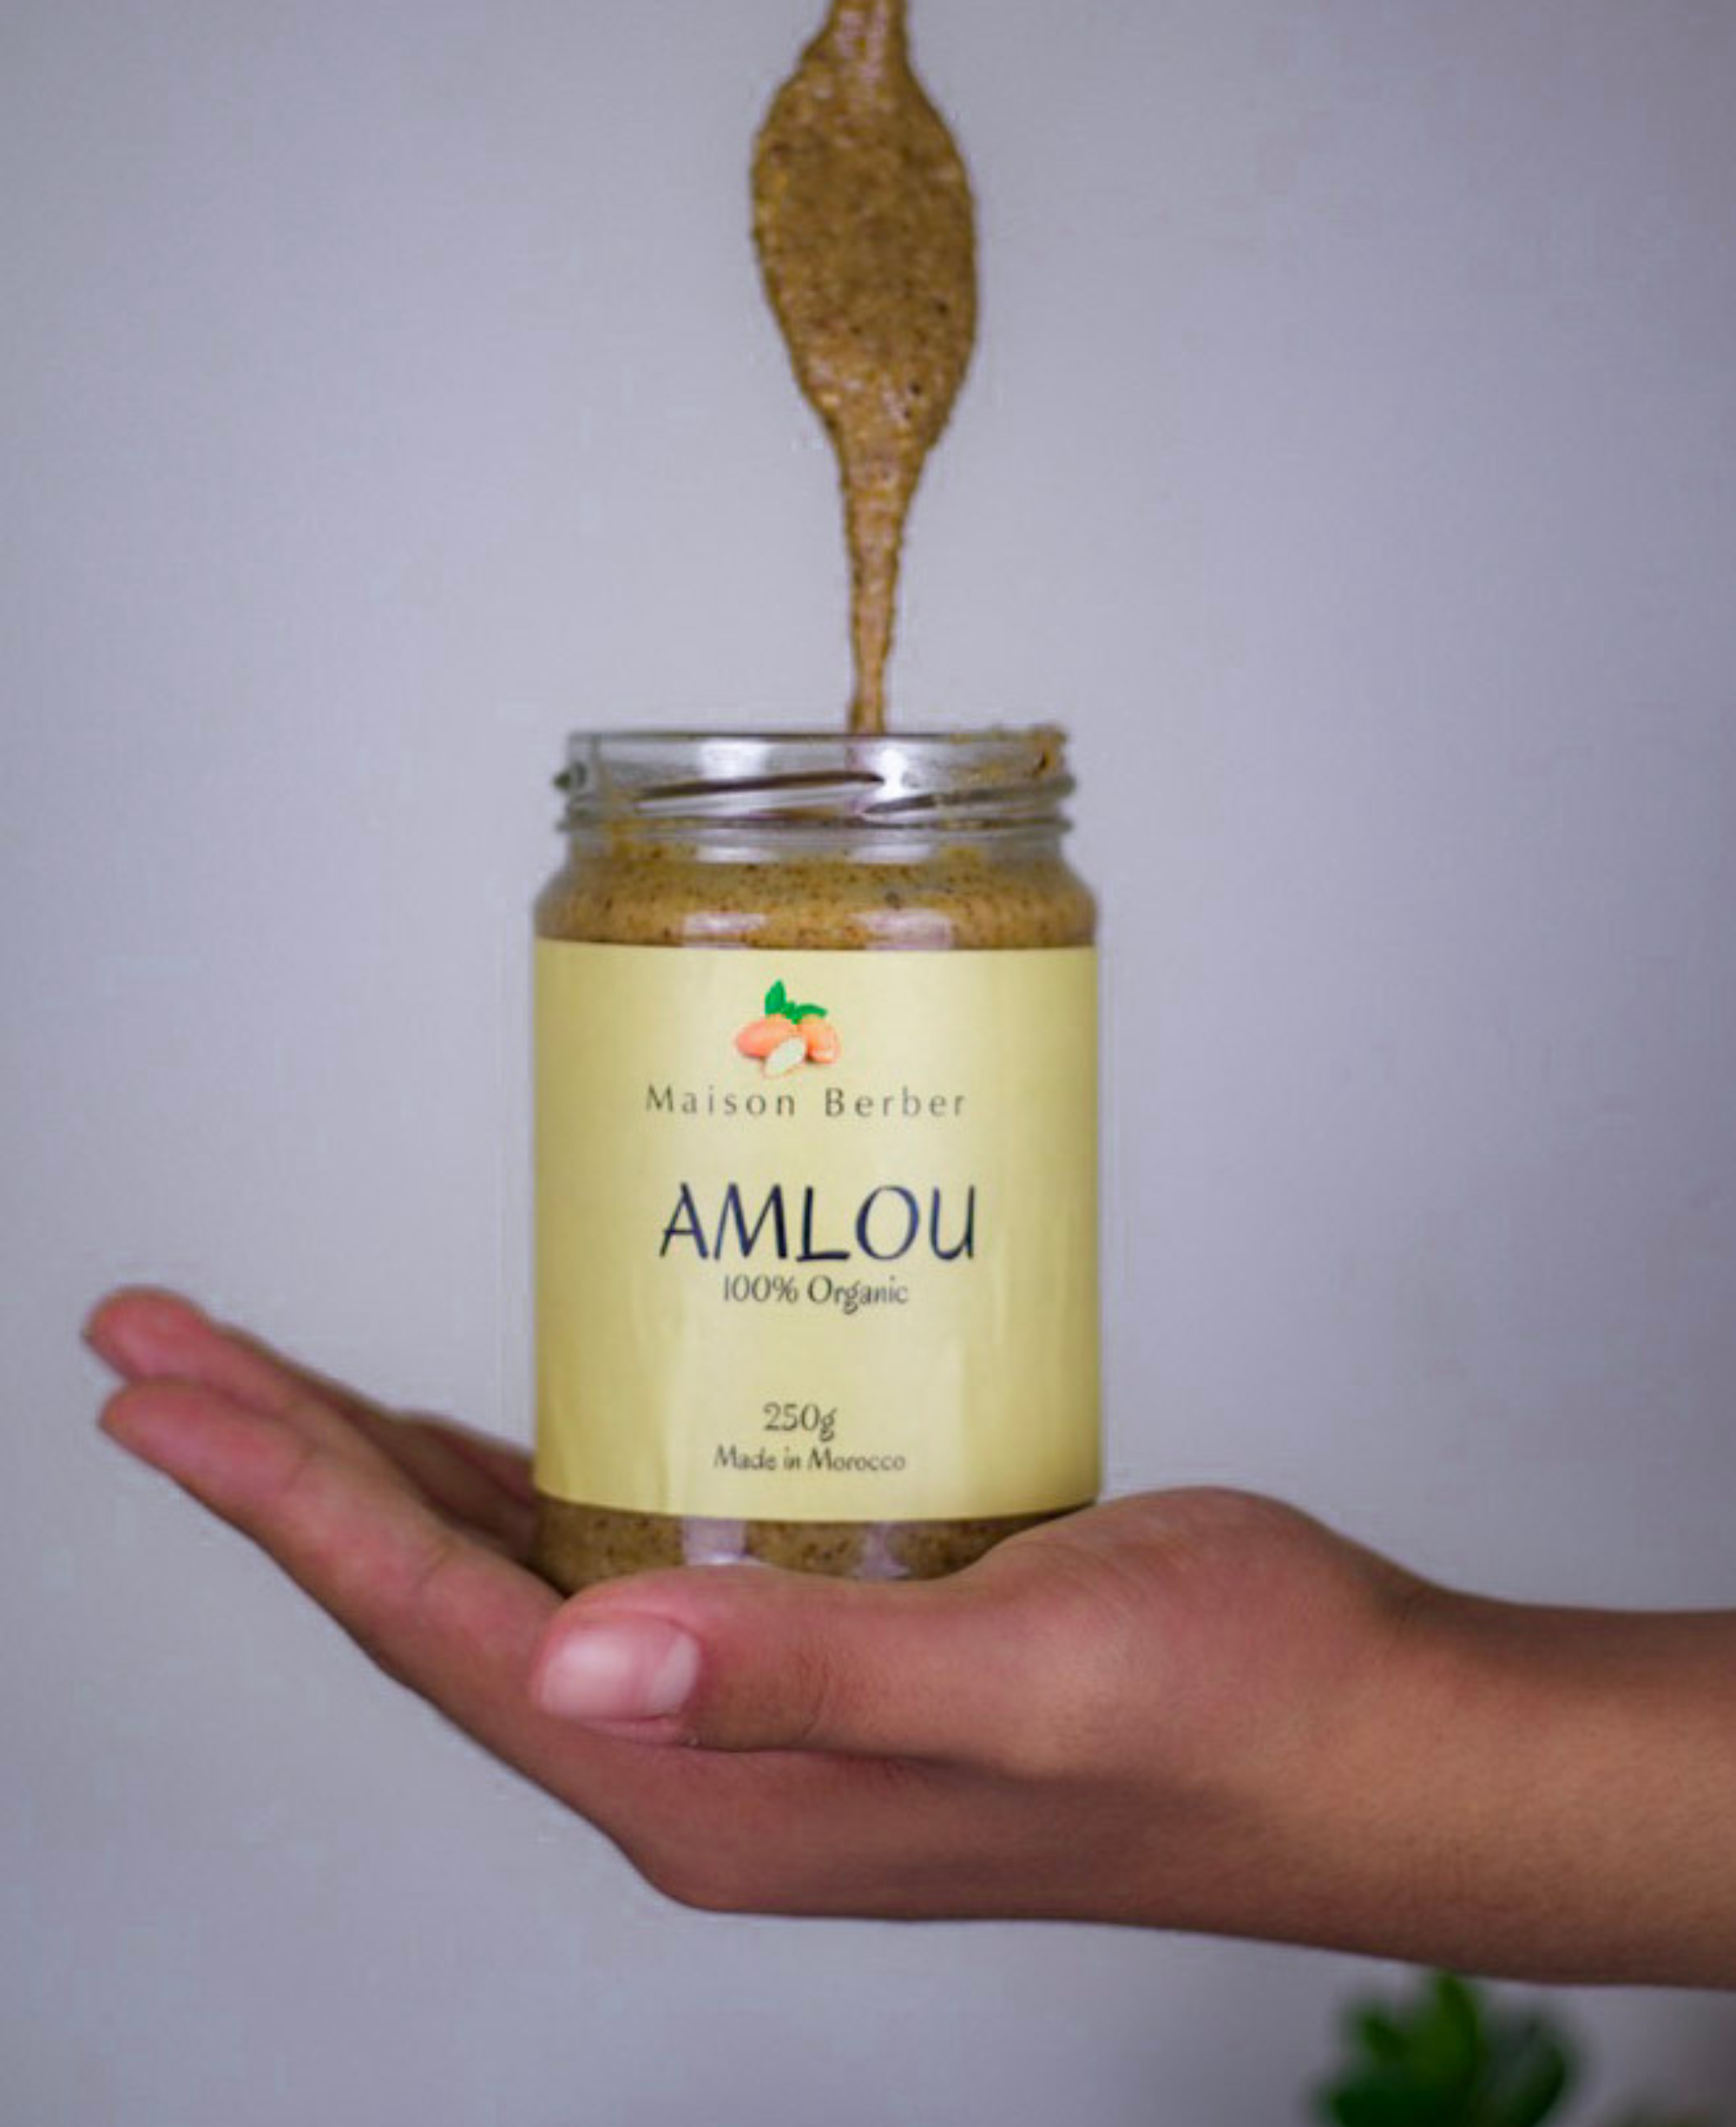 Organic Pure Amlou with Argan Oil, Almonds, and Honey - Amlou 100% Natural - Moroccan Amlou Almond with Argan Oil and Honey 250g